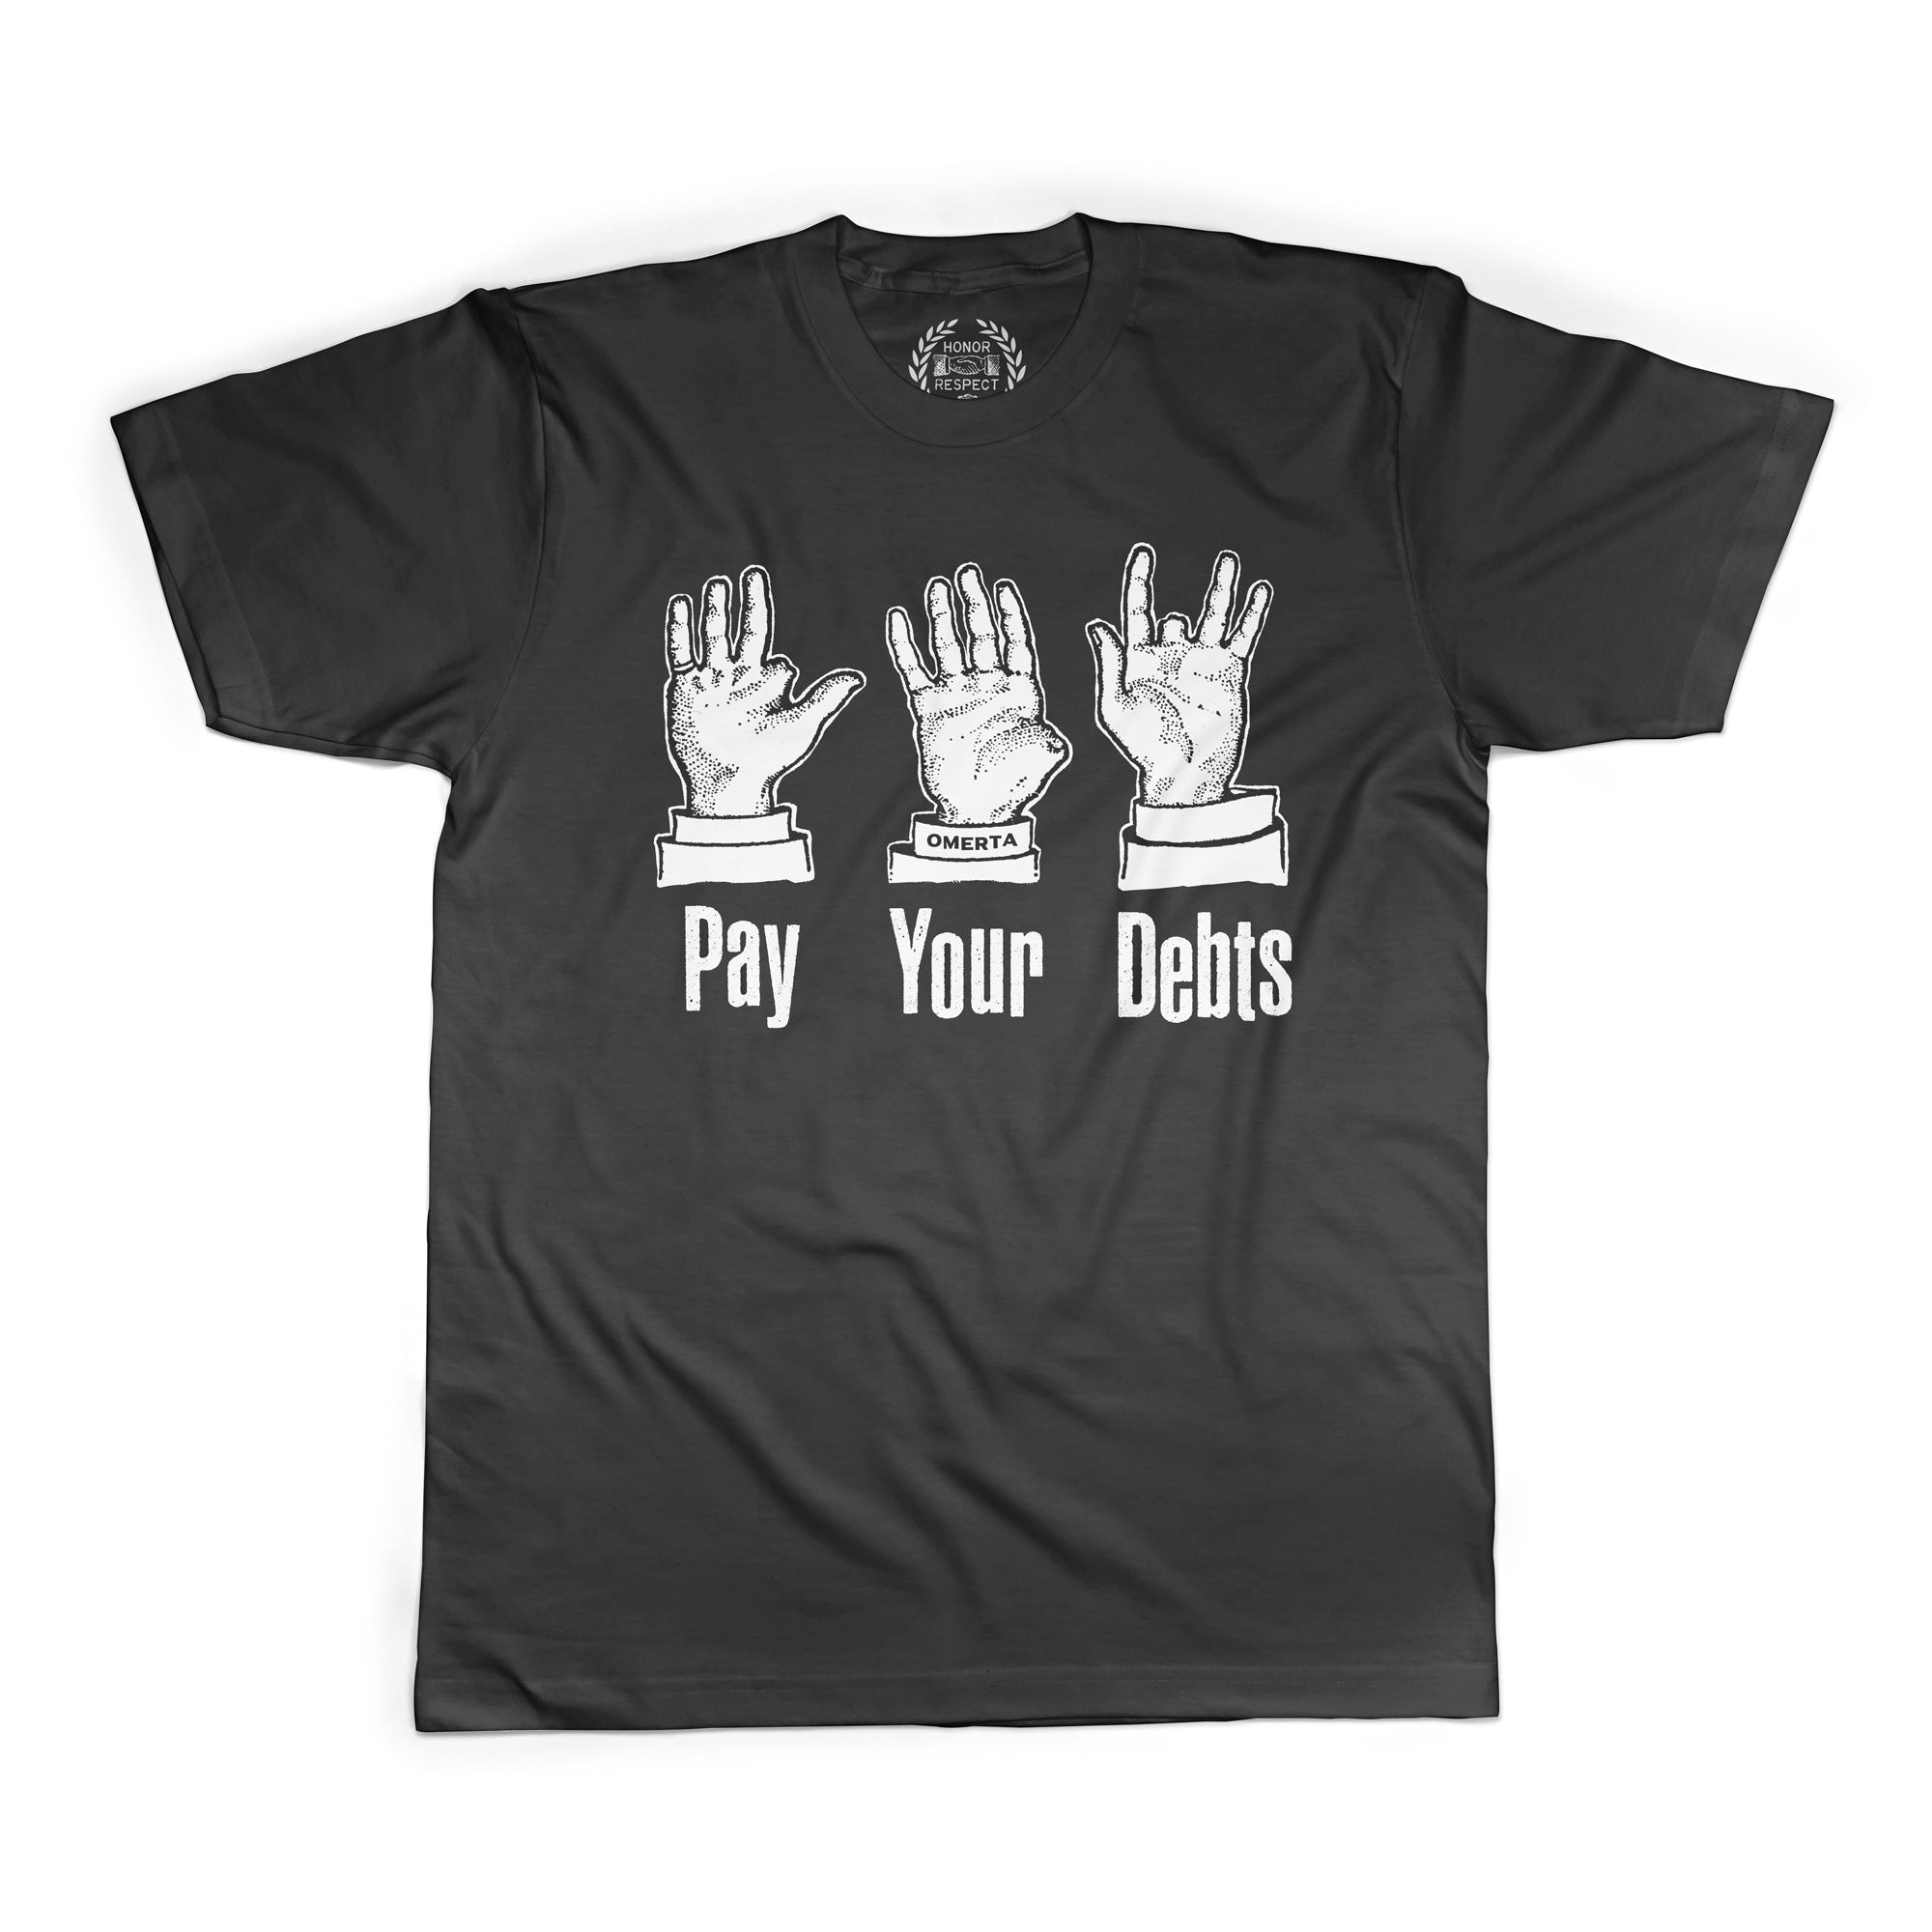 PRE-ORDER Pay Your Debts Shirt